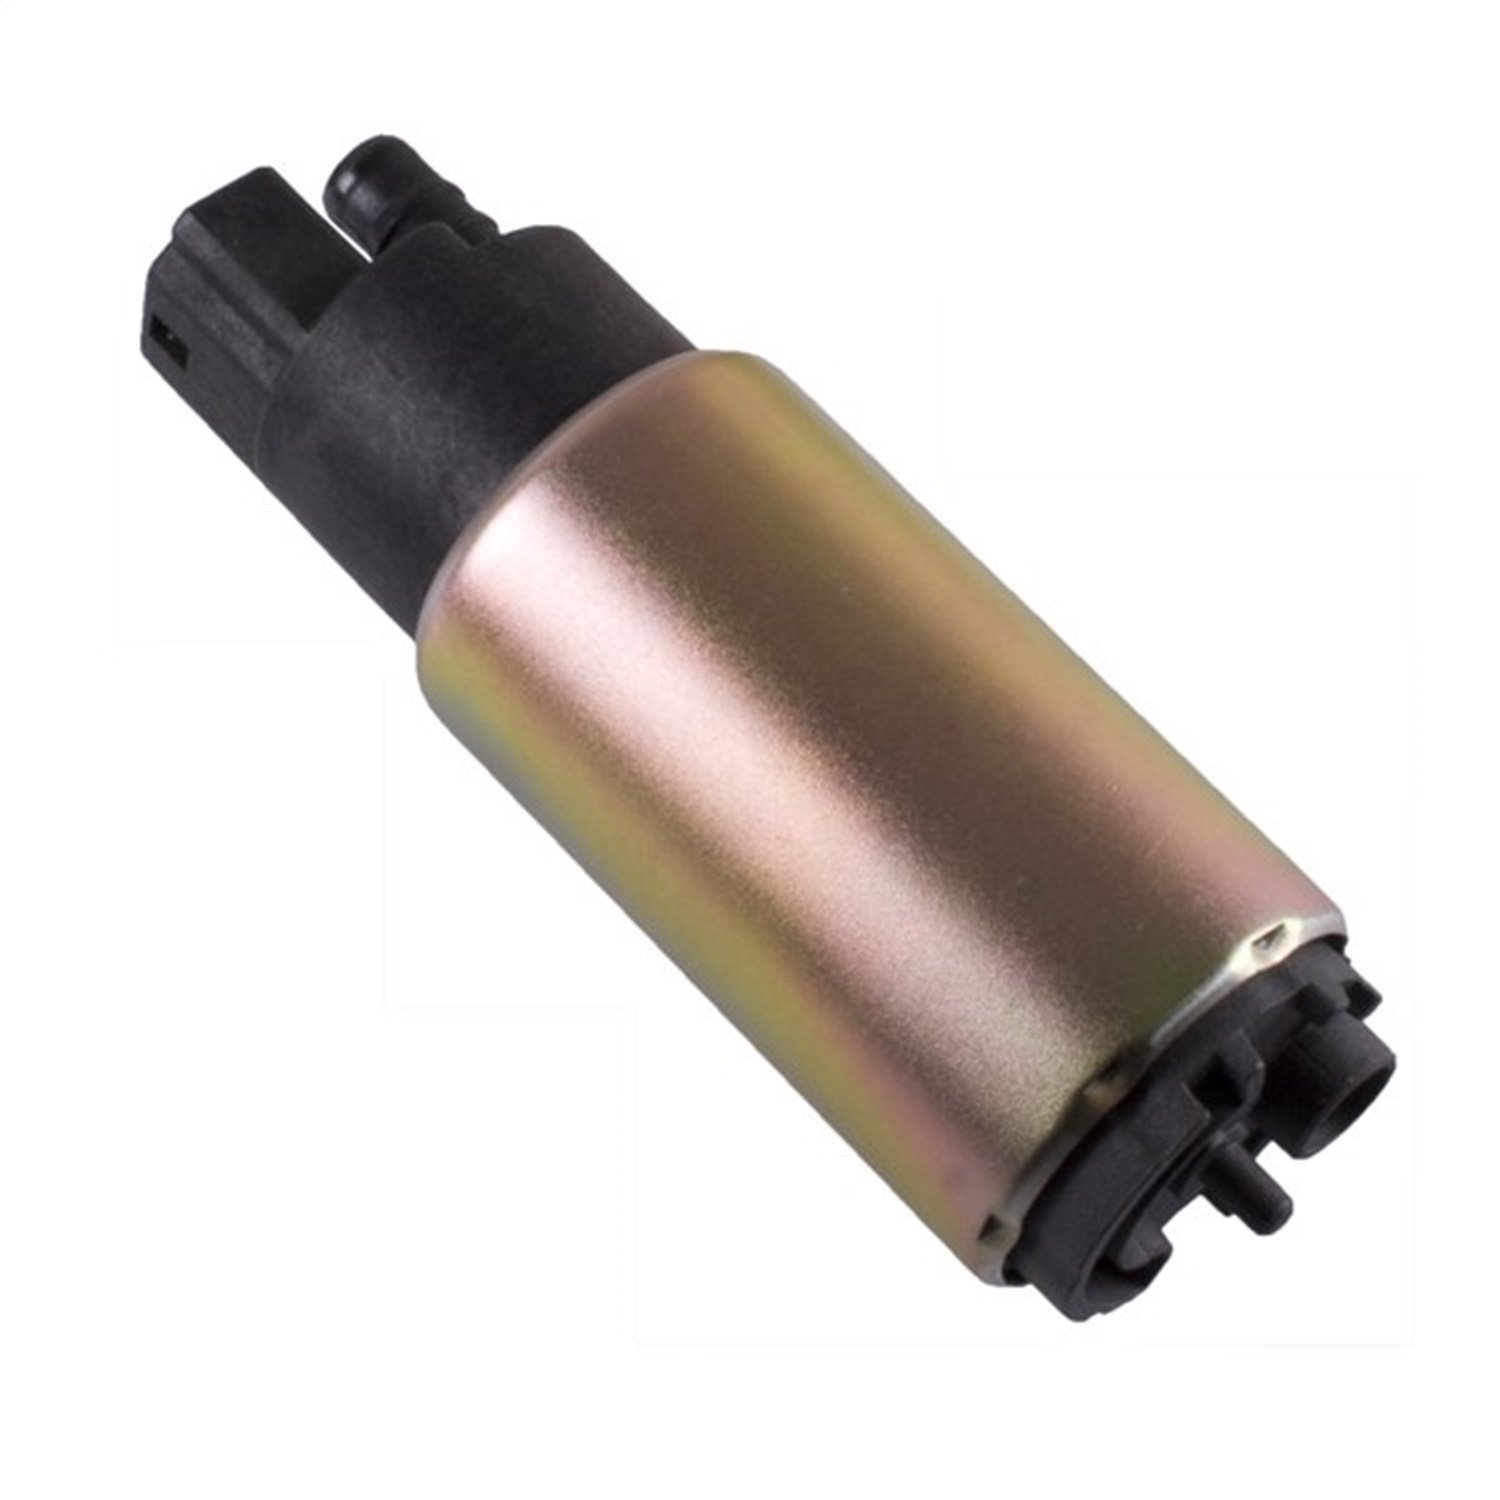 Replacement fuel pump filter from Omix-ADA, Fits 94-96